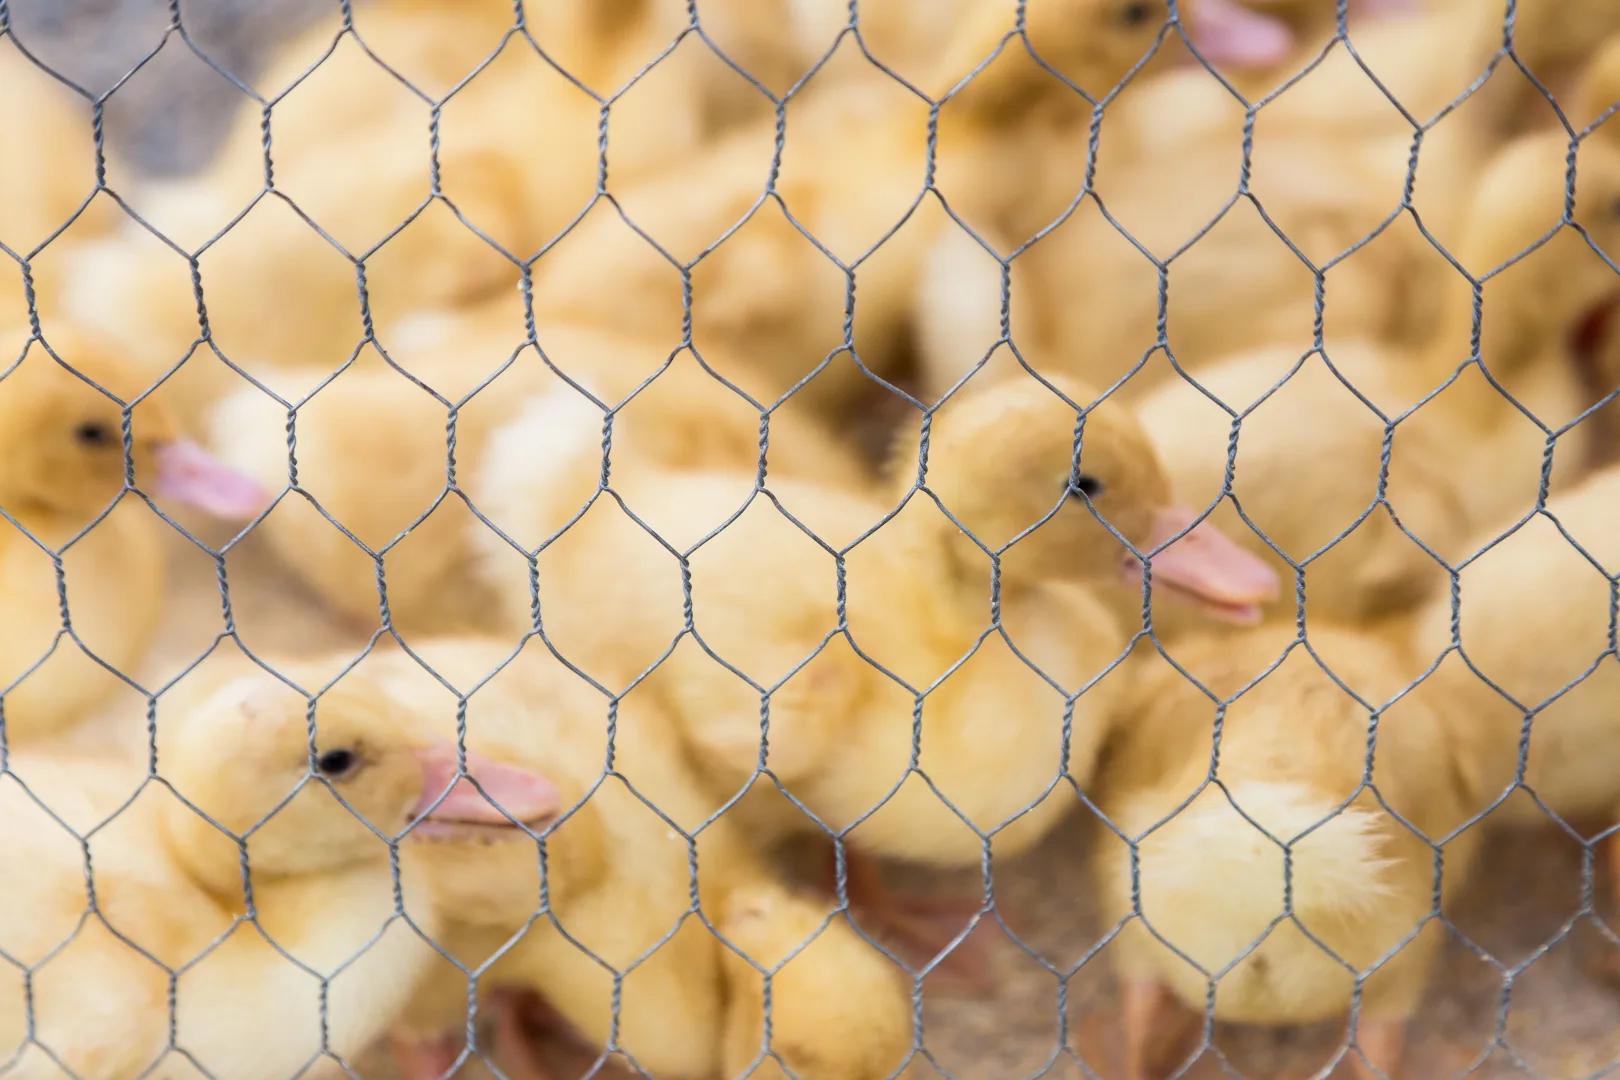 UK considers requiring poultry owners to register birds for ‘public health’